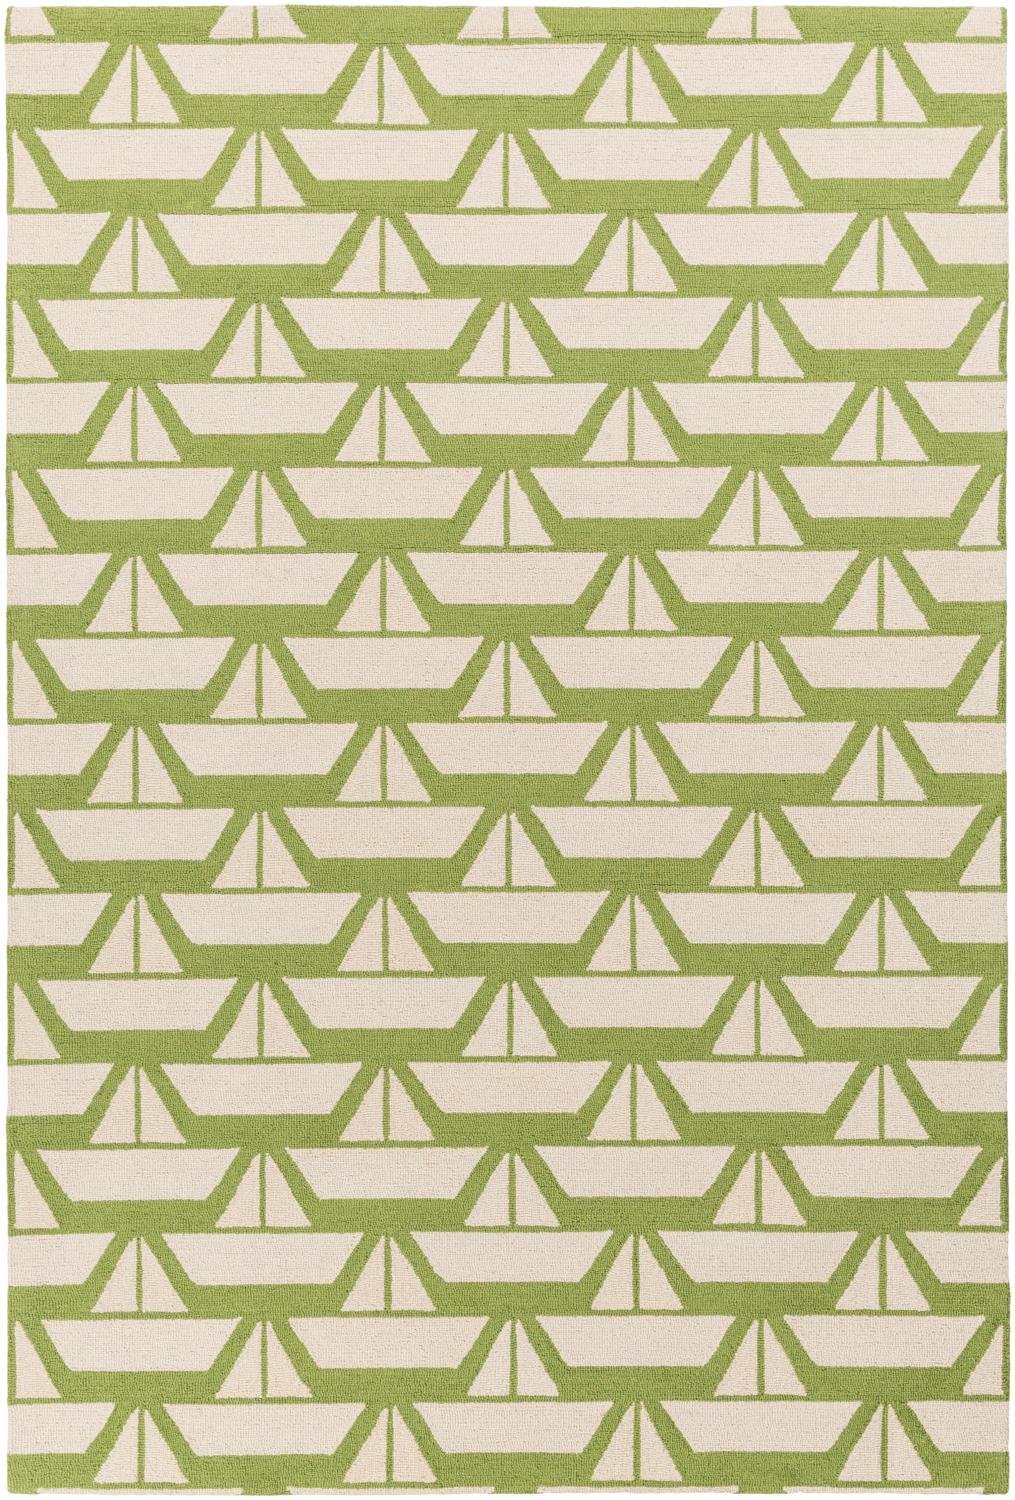 Surya Tic Tac Toe Wool 5' x 7'6" Area Rugs With Grass Green And Light Beige